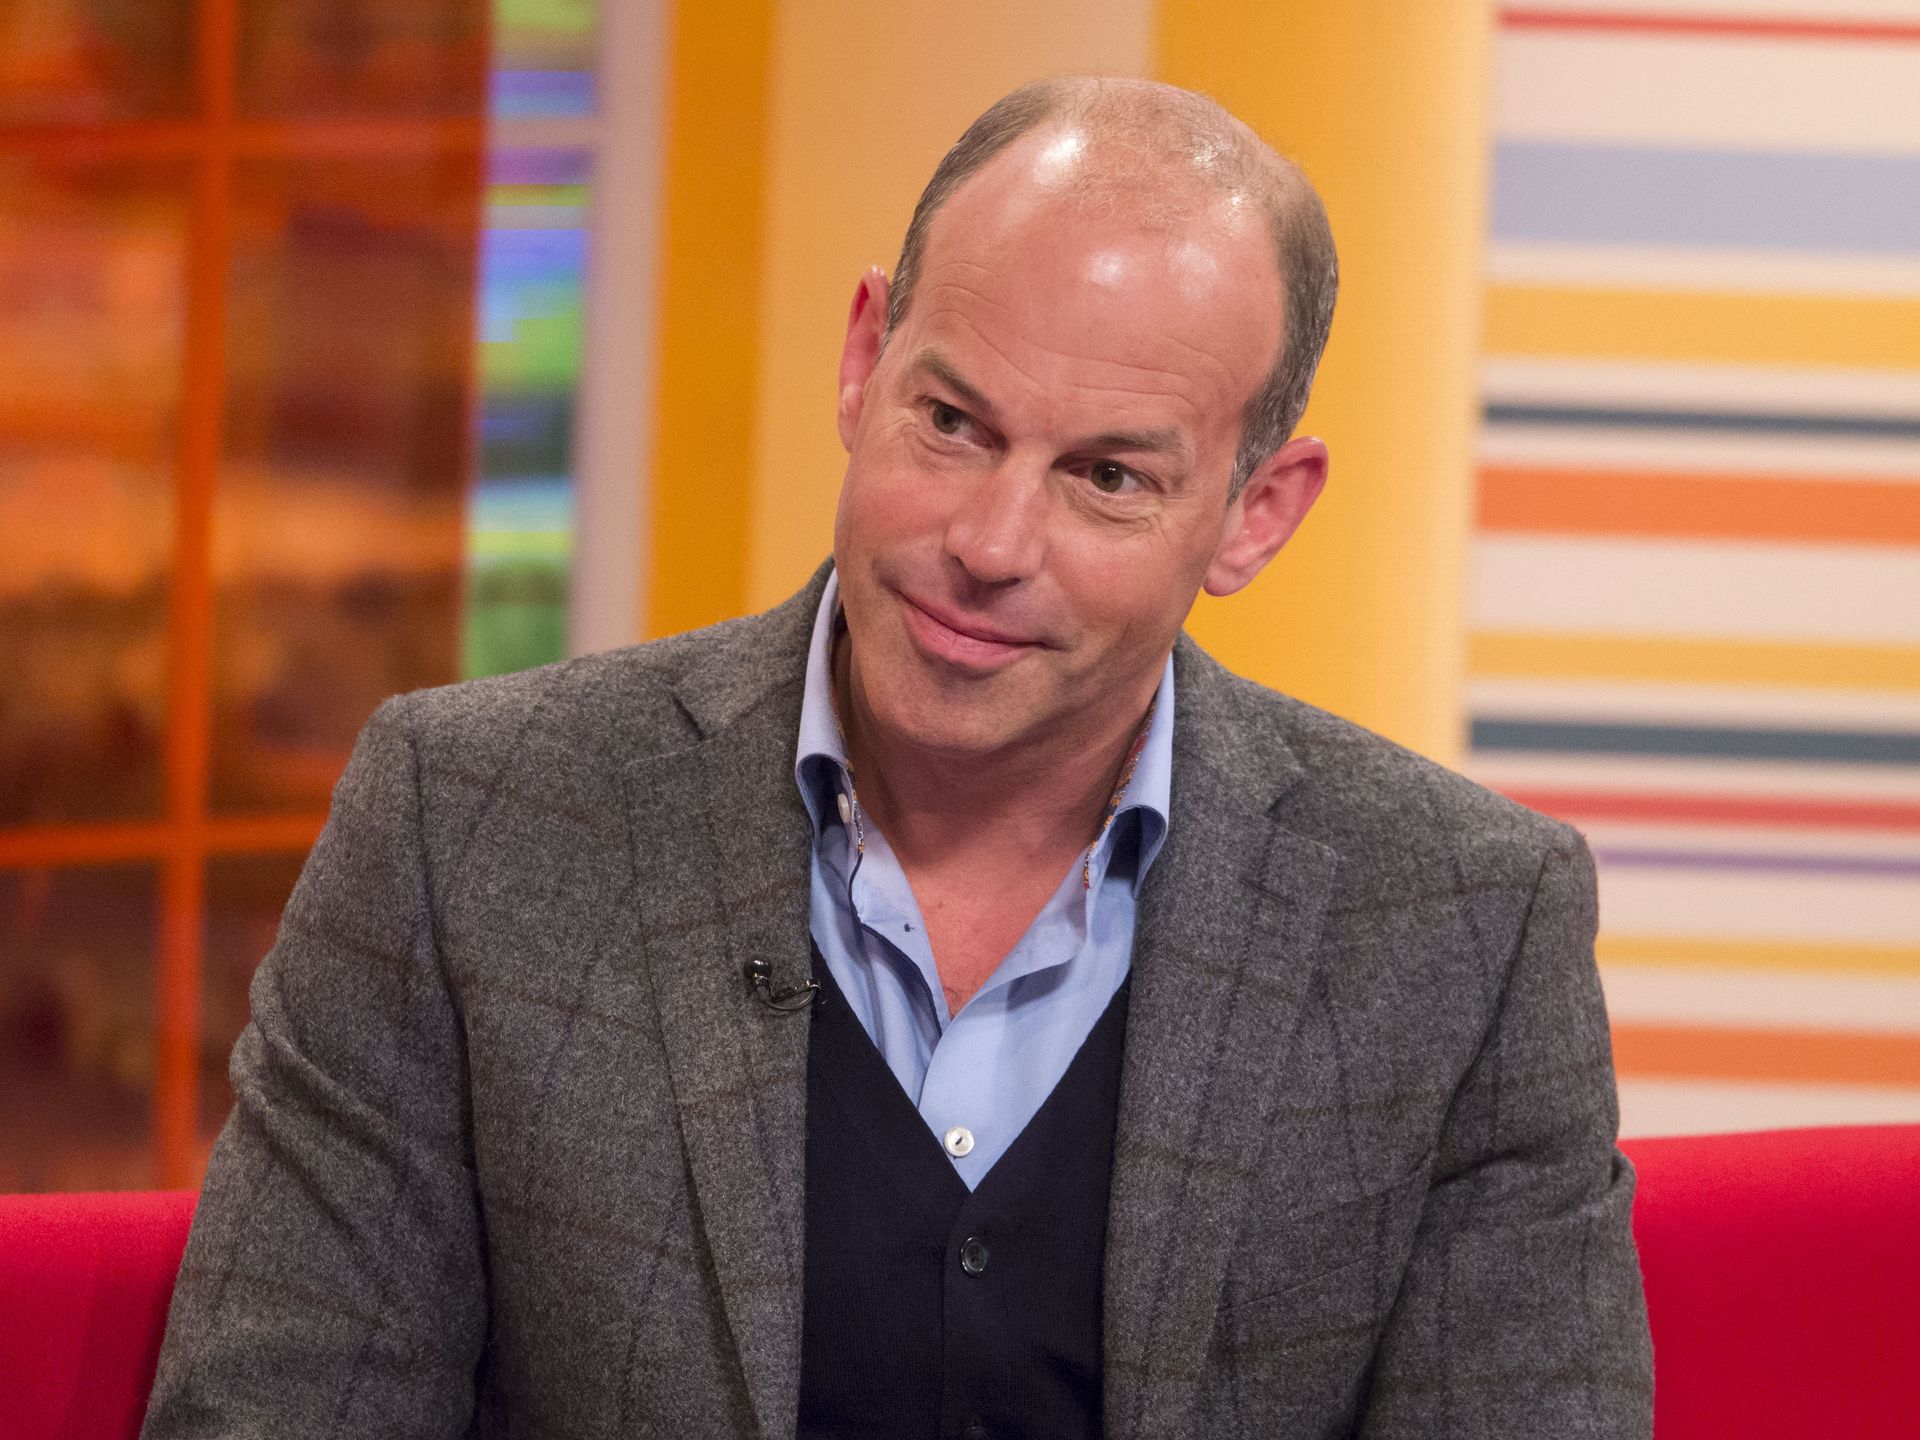 Phil Spencer says brother tried to save parents by cutting their seatbelts  with a penknife after river crash